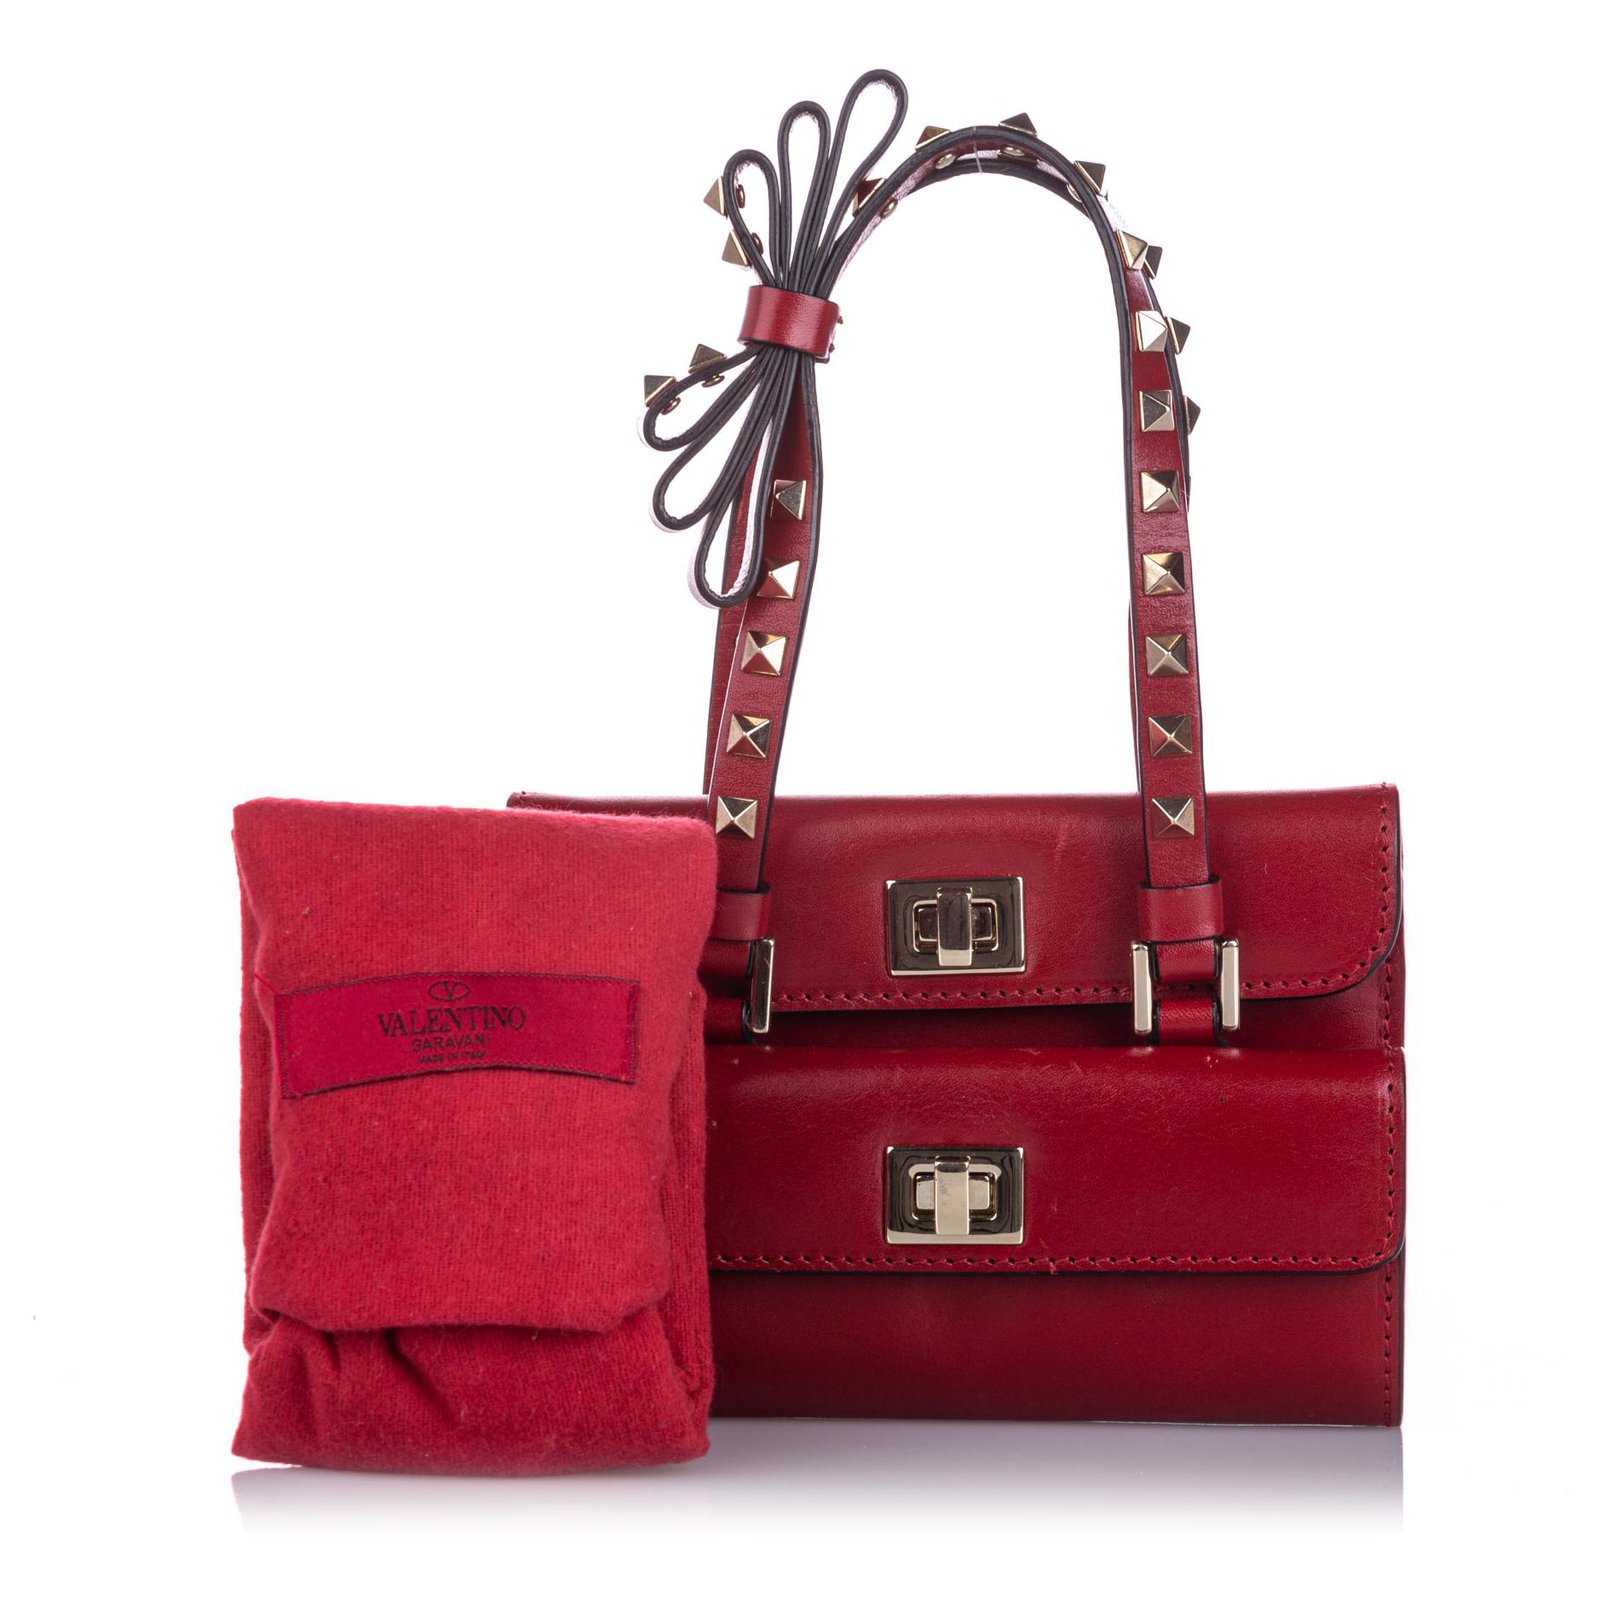 Bags and Purses on X: Twist top handle front flap bags available